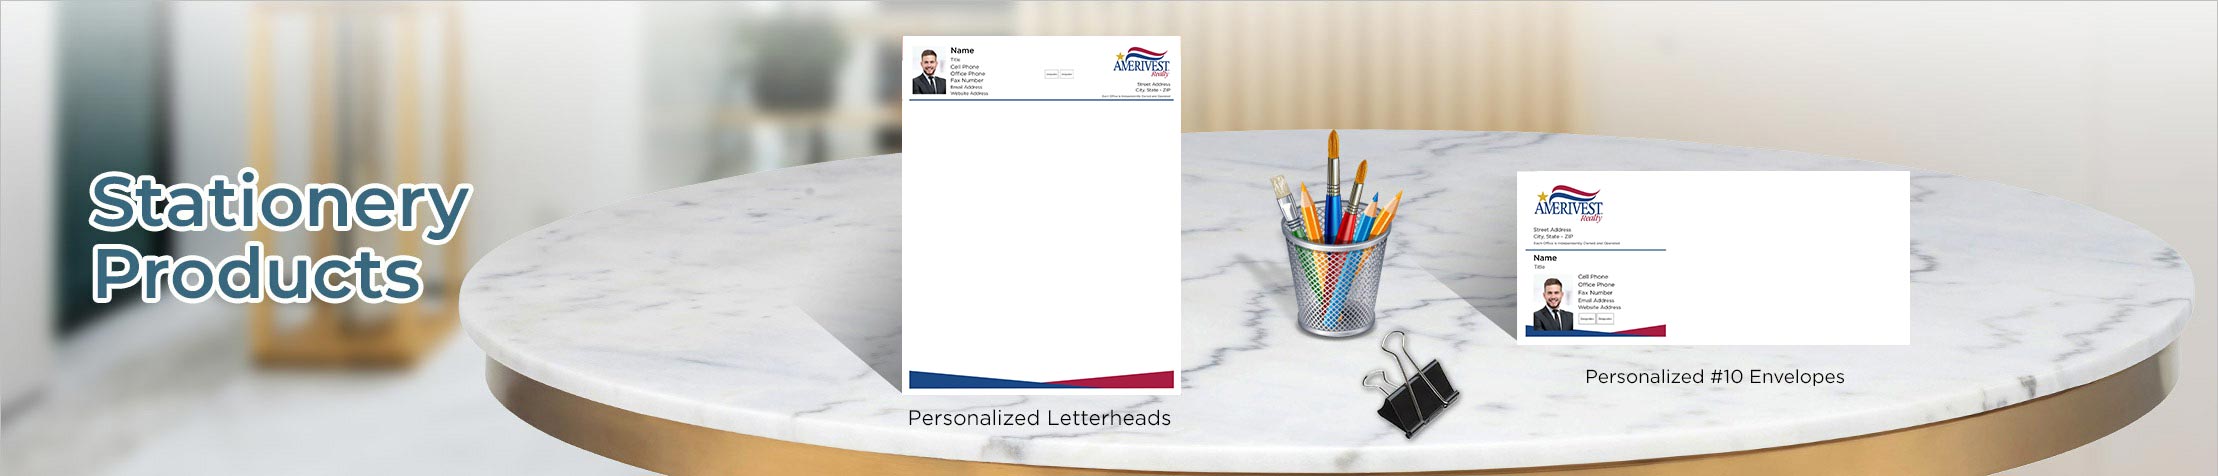 Amerivest Realty Real Estate Stationery Products - Custom Letterhead & Envelopes Stationery Products for Realtors | BestPrintBuy.com